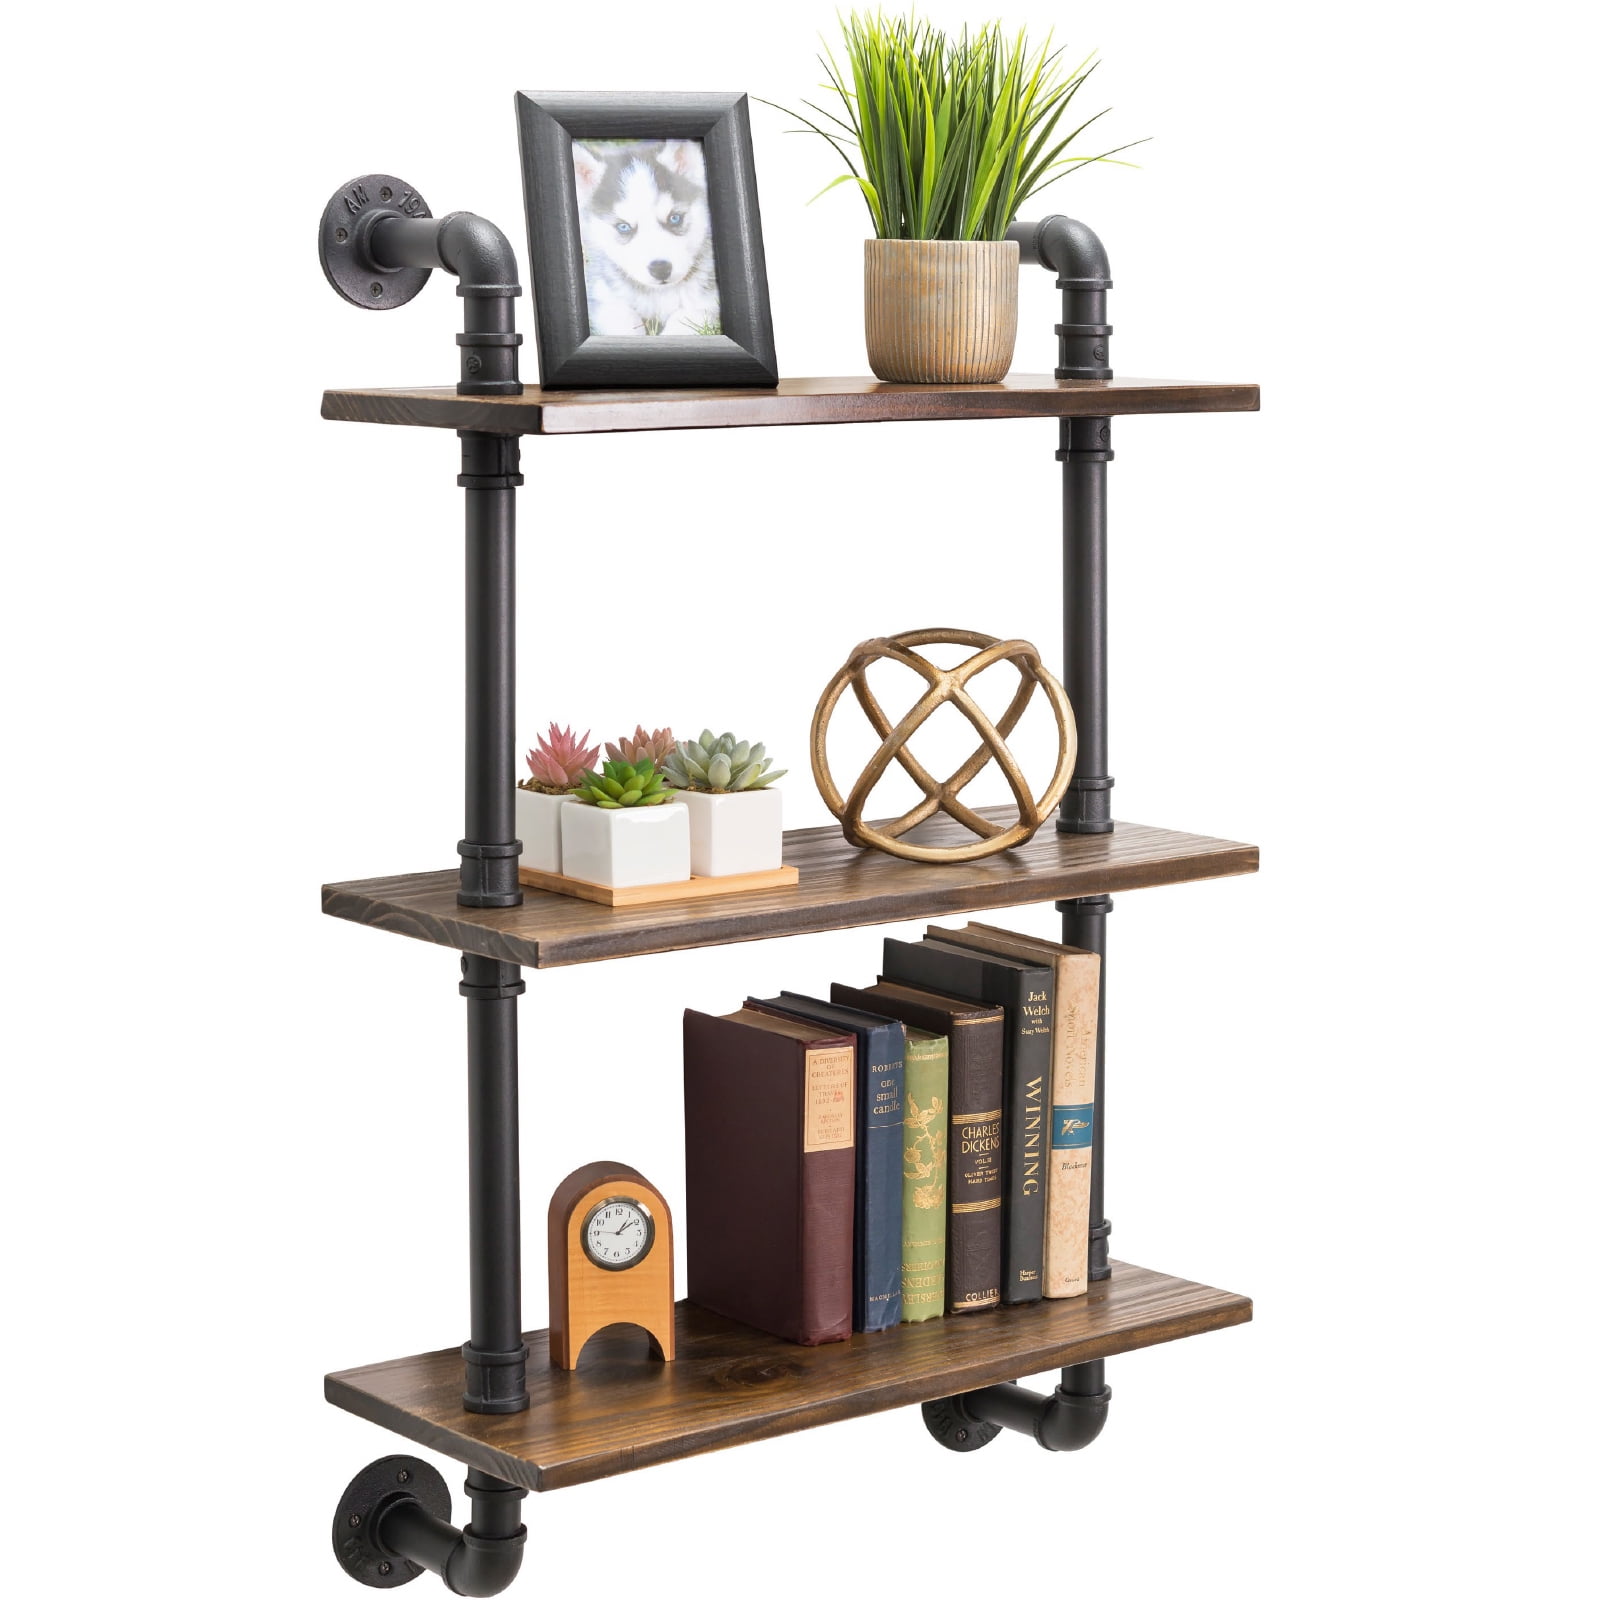 Excello Global Products 3-Tier Rustic Wooden Wall Floating Shelf